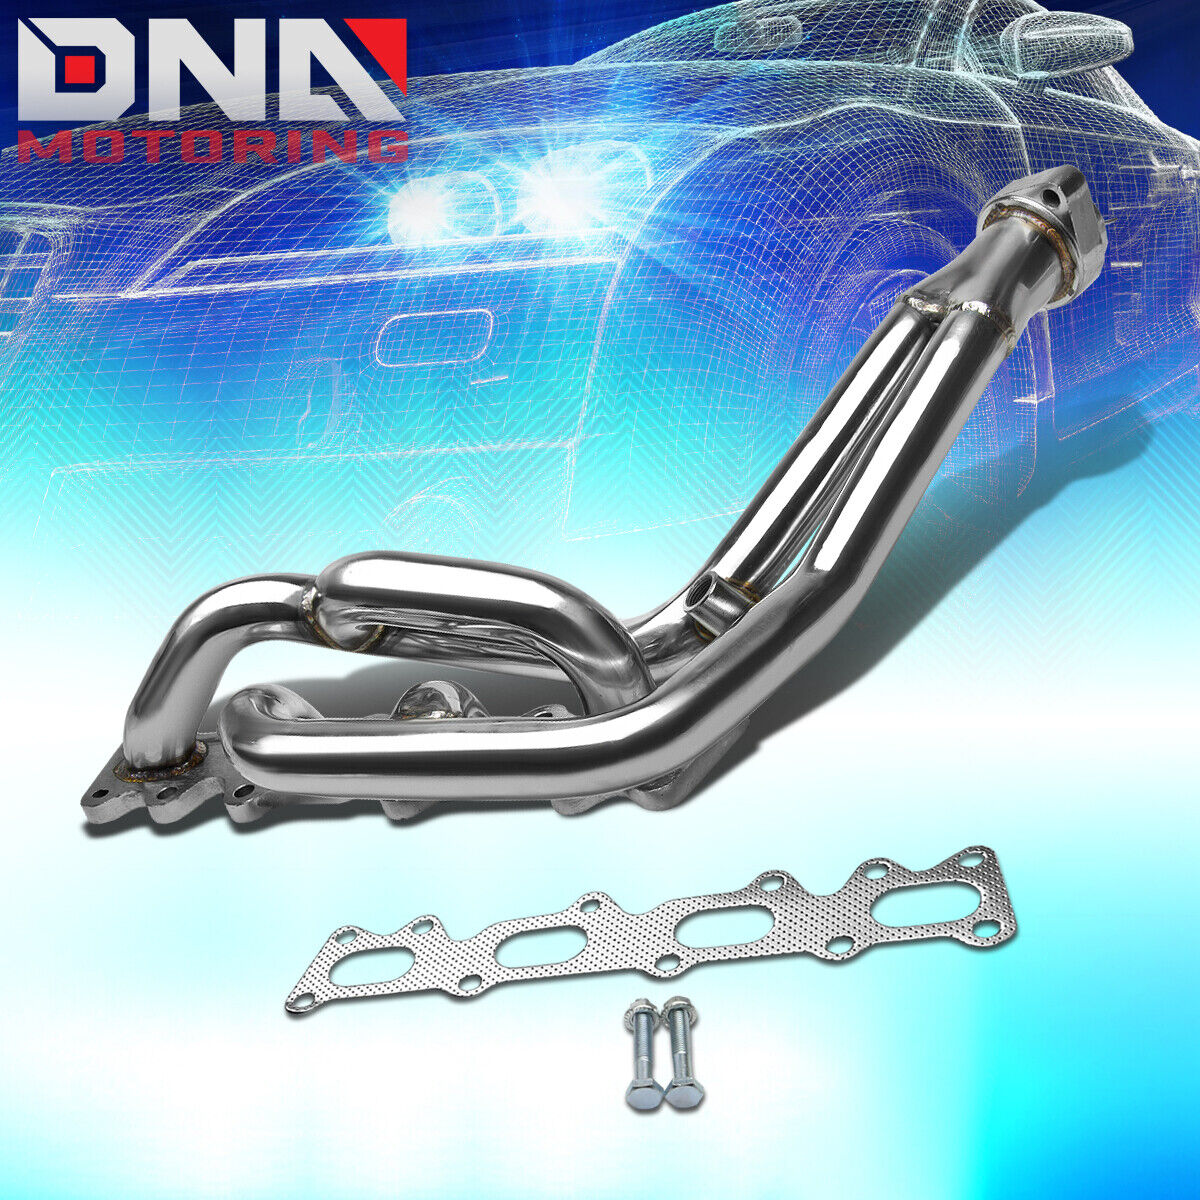 STAINLESS STEEL 4-2-1 HEADER FOR MERCEDES BENZ W202/203 2.2/2.3 EXHAUST/MANIFOLD